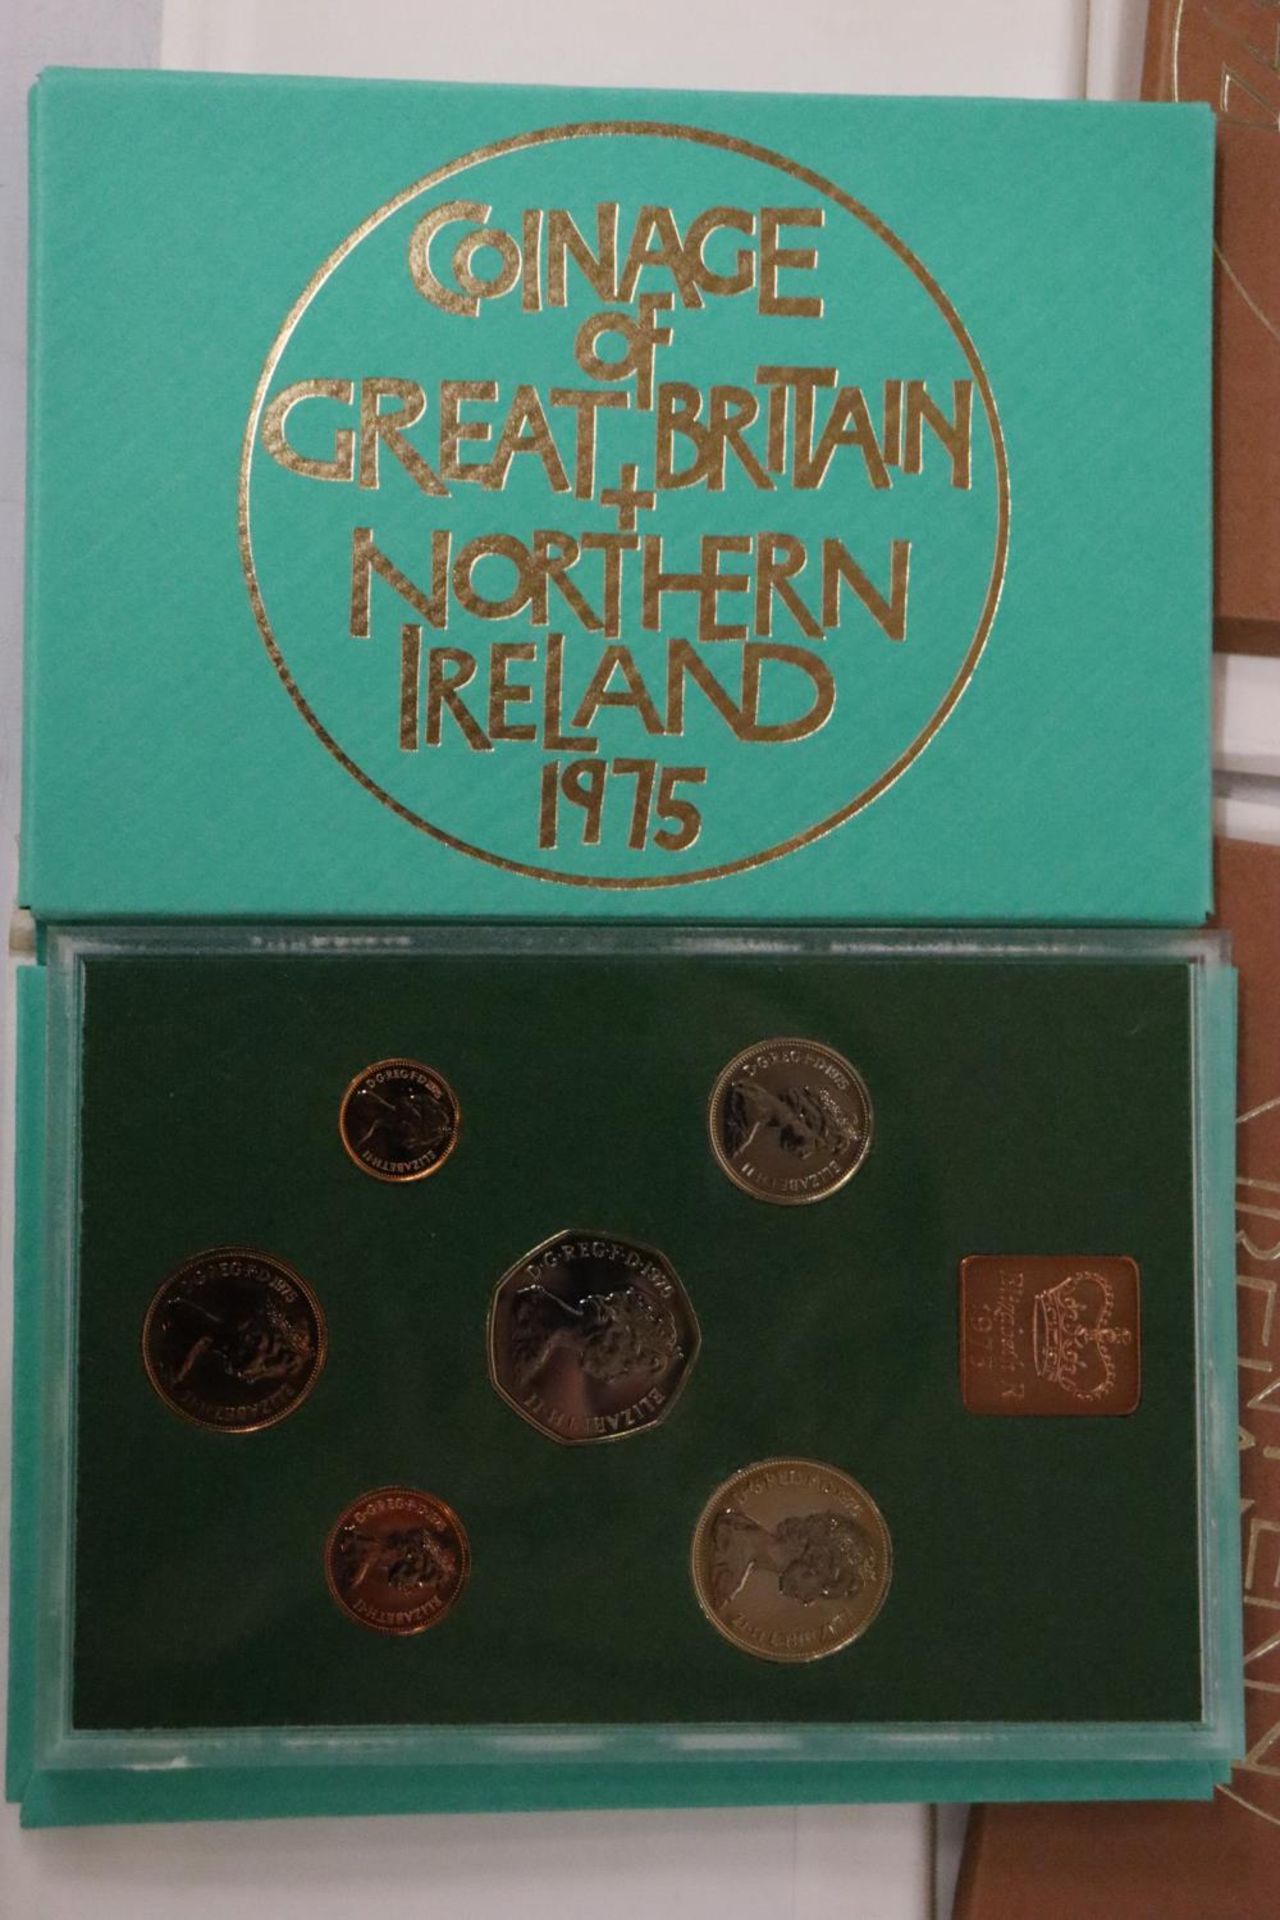 UK & NI , 2 X 1972, 2 X’73, 2 X ’74 AND 2 X ’75 YEAR PACKS OF COINS CONTAINED IN ENVELOPE - Bild 2 aus 5